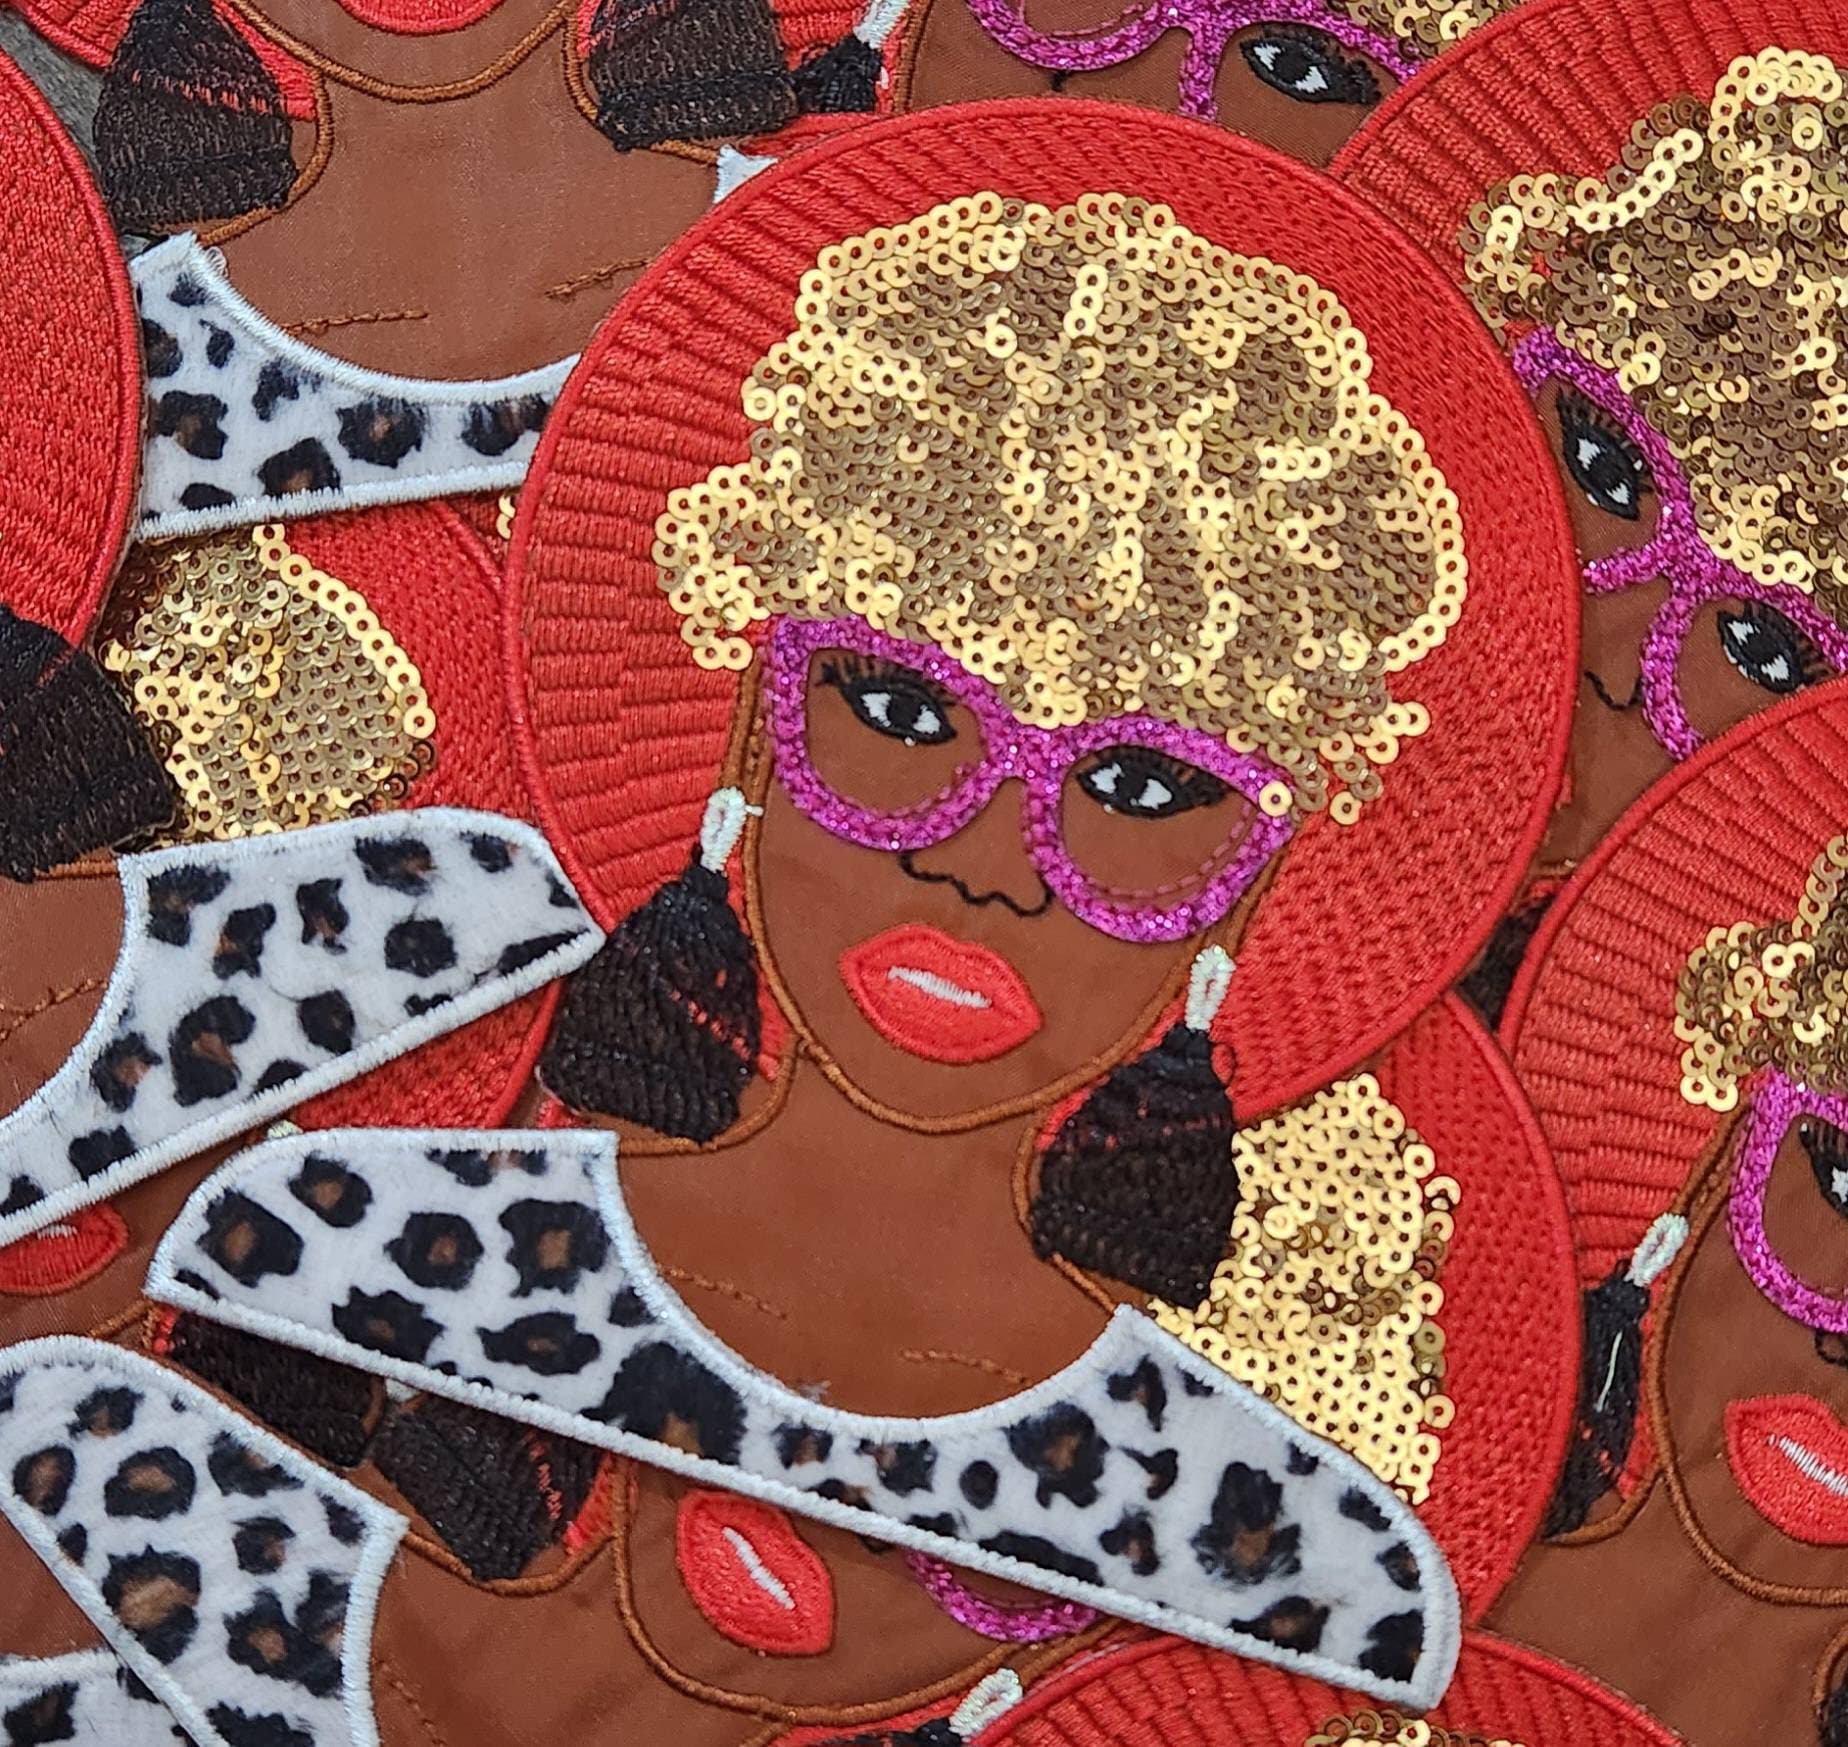 Sparkling Black Girl Power: "Lady in Fur Leopard Top & Gold Hair" Sequins and Satin Embroidered Patch, Size 6" Patch, 1-pc Iron-on Applique